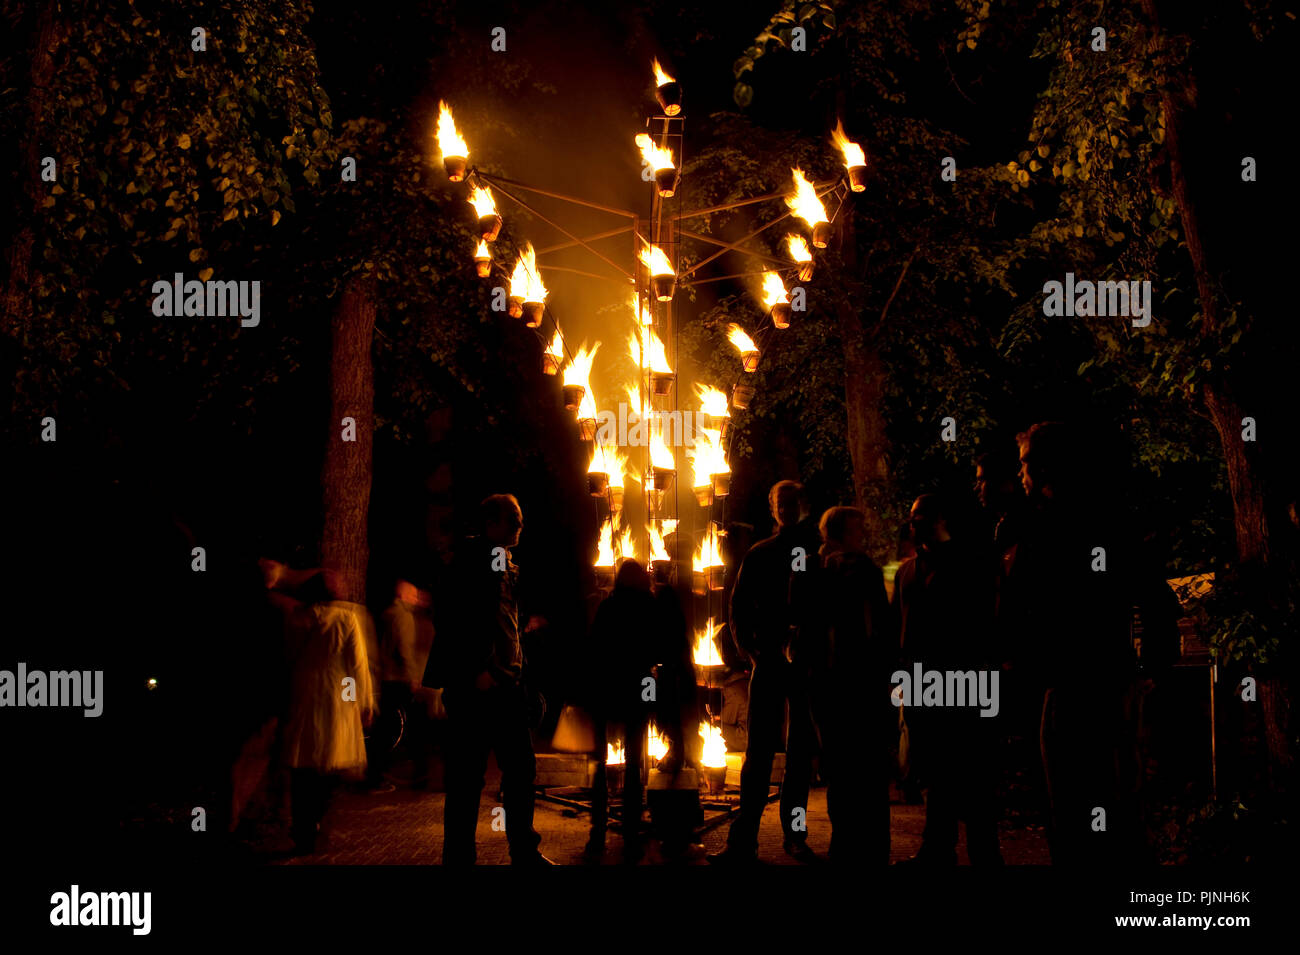 Opening of the Brugge Centraal culture festival with the Installation De Feu from French fire company Compagnie Carabosse in the Minnewaterpark in Bru Stock Photo